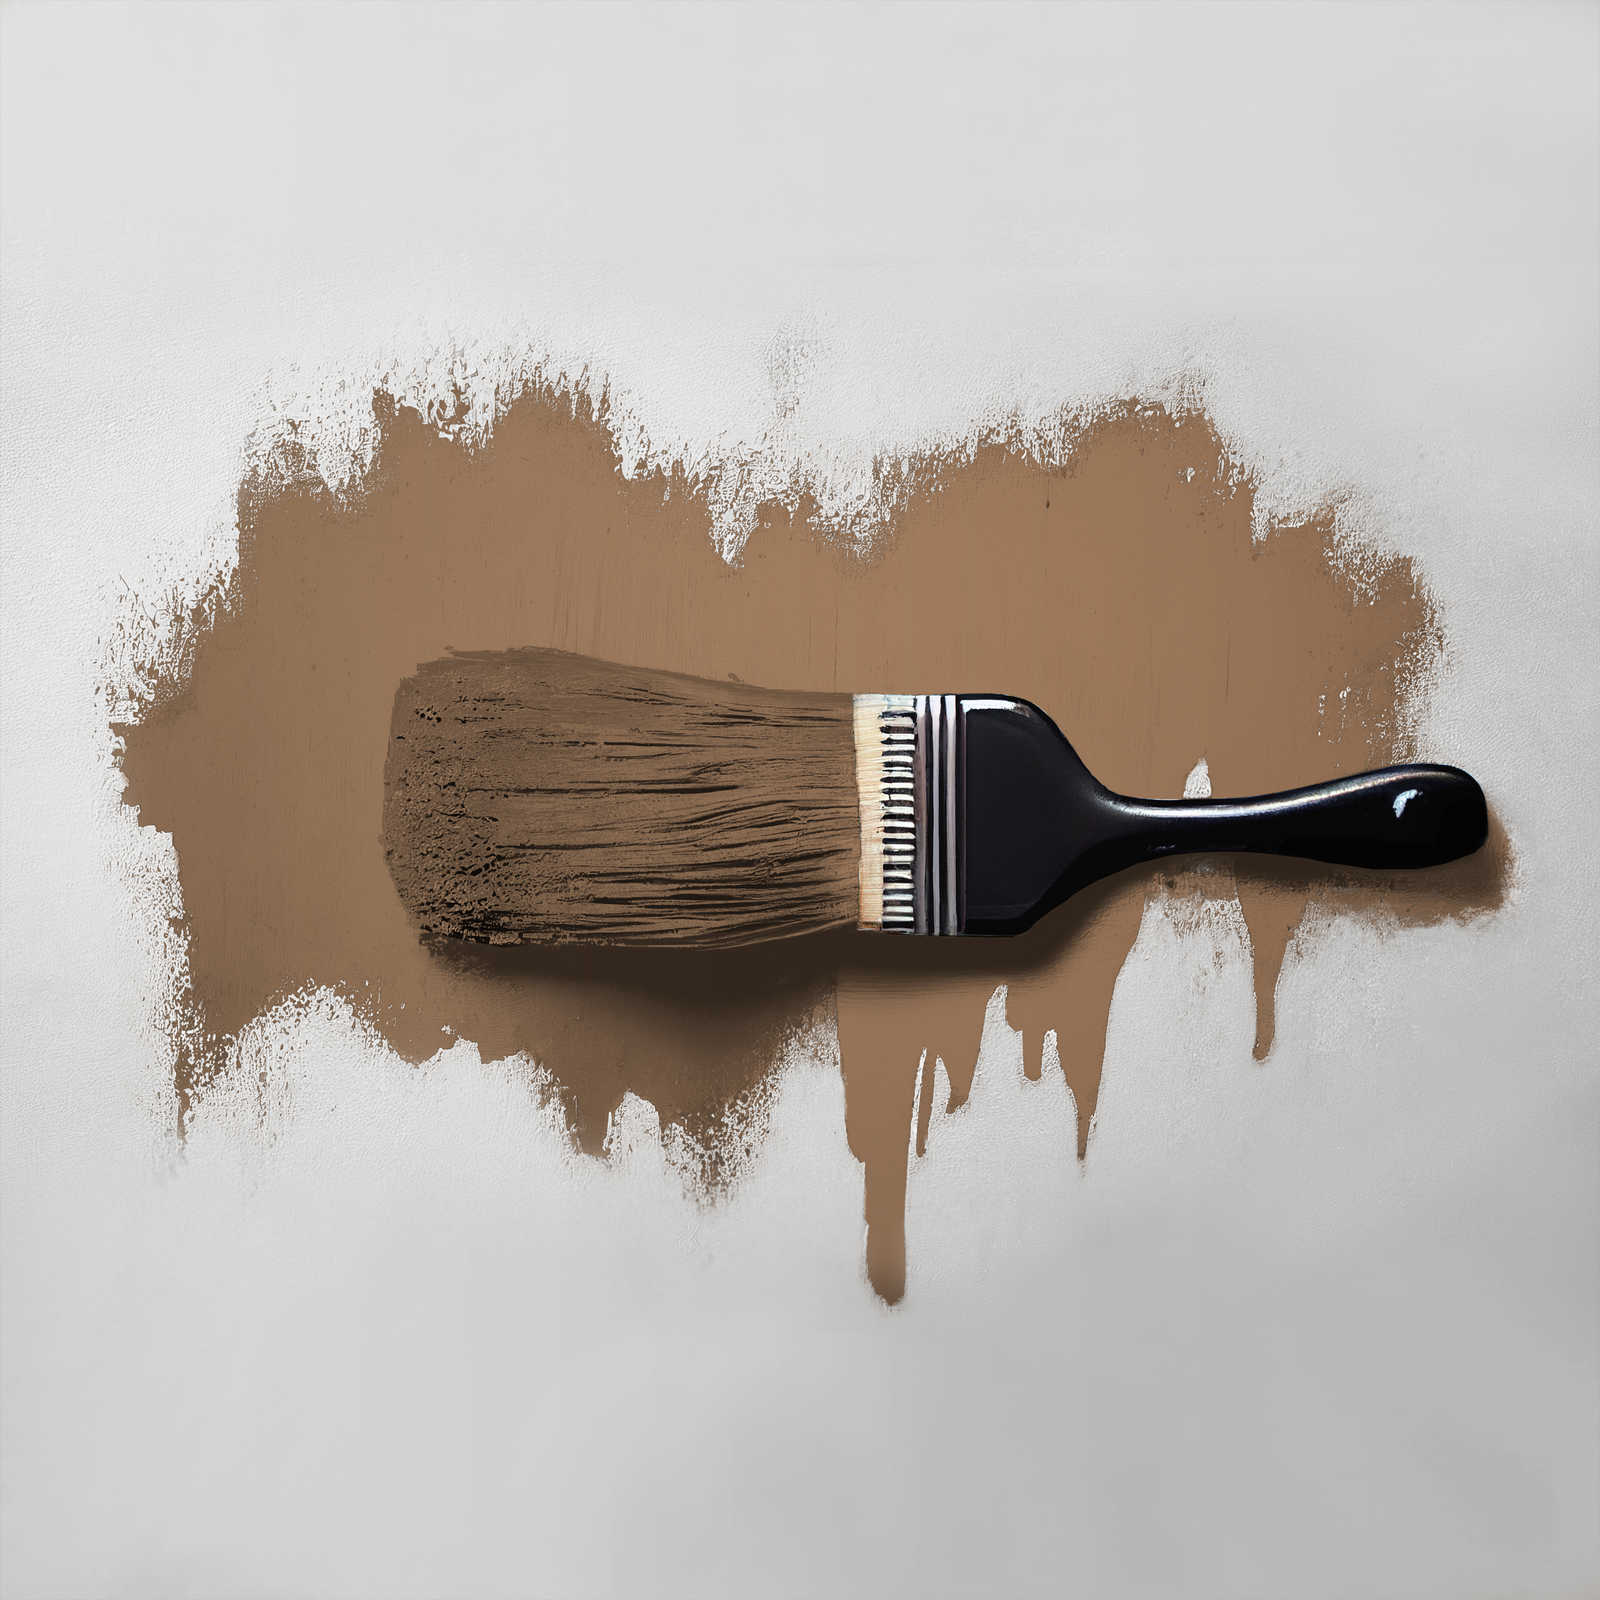             Wall Paint TCK6007 »Awesome Anis« in cosy brown – 2.5 litre
        